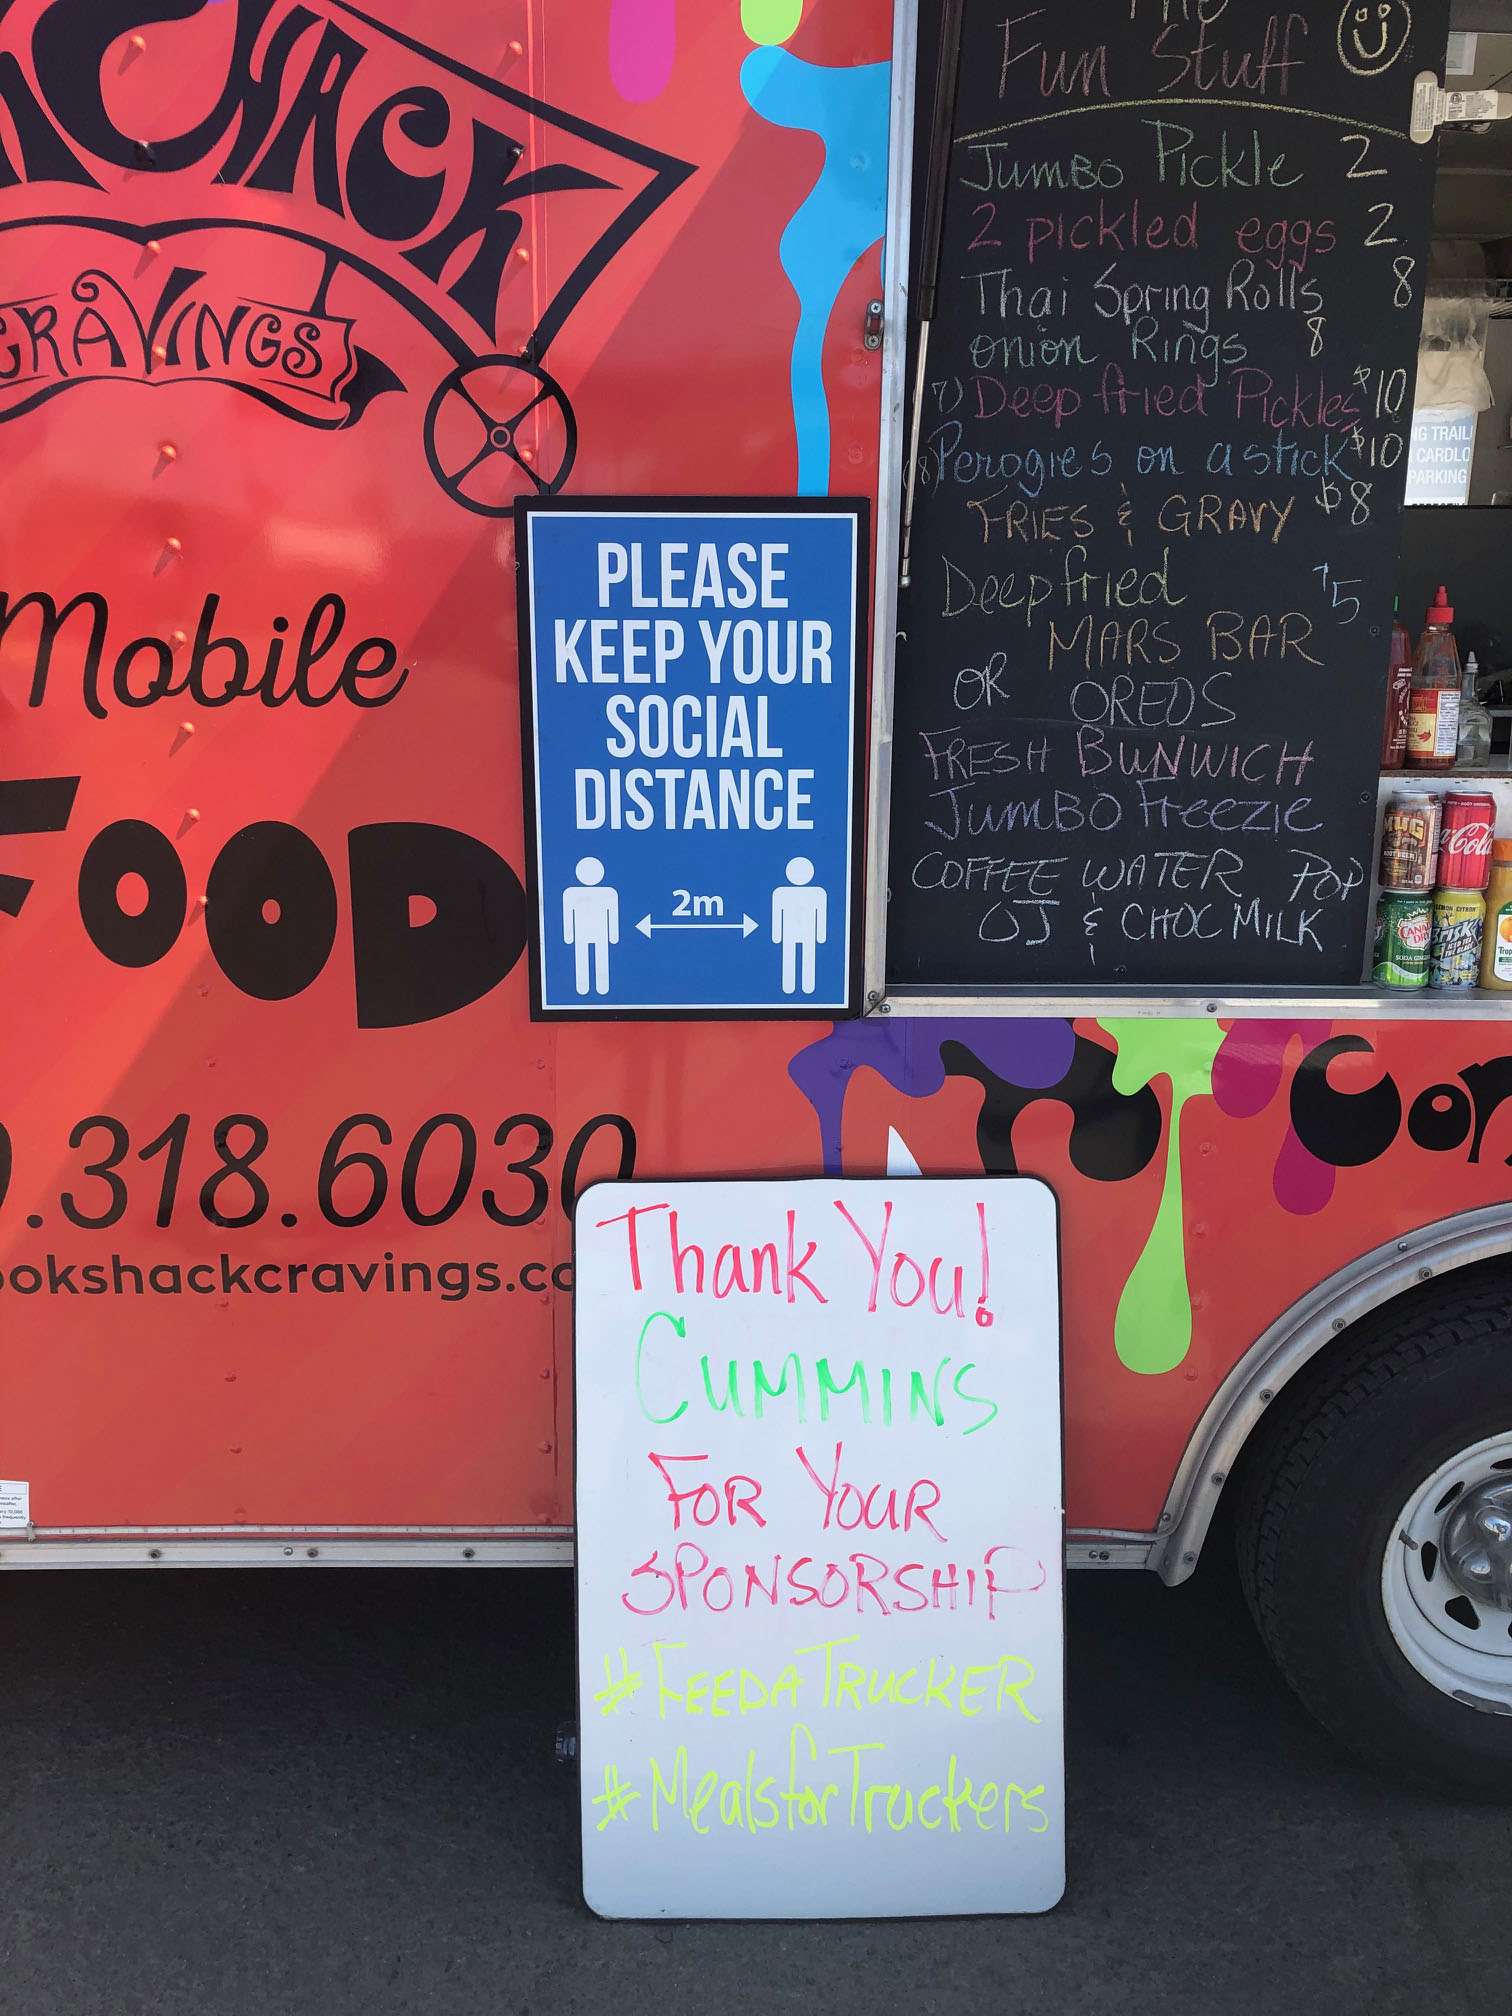 Food truck to feed truckers